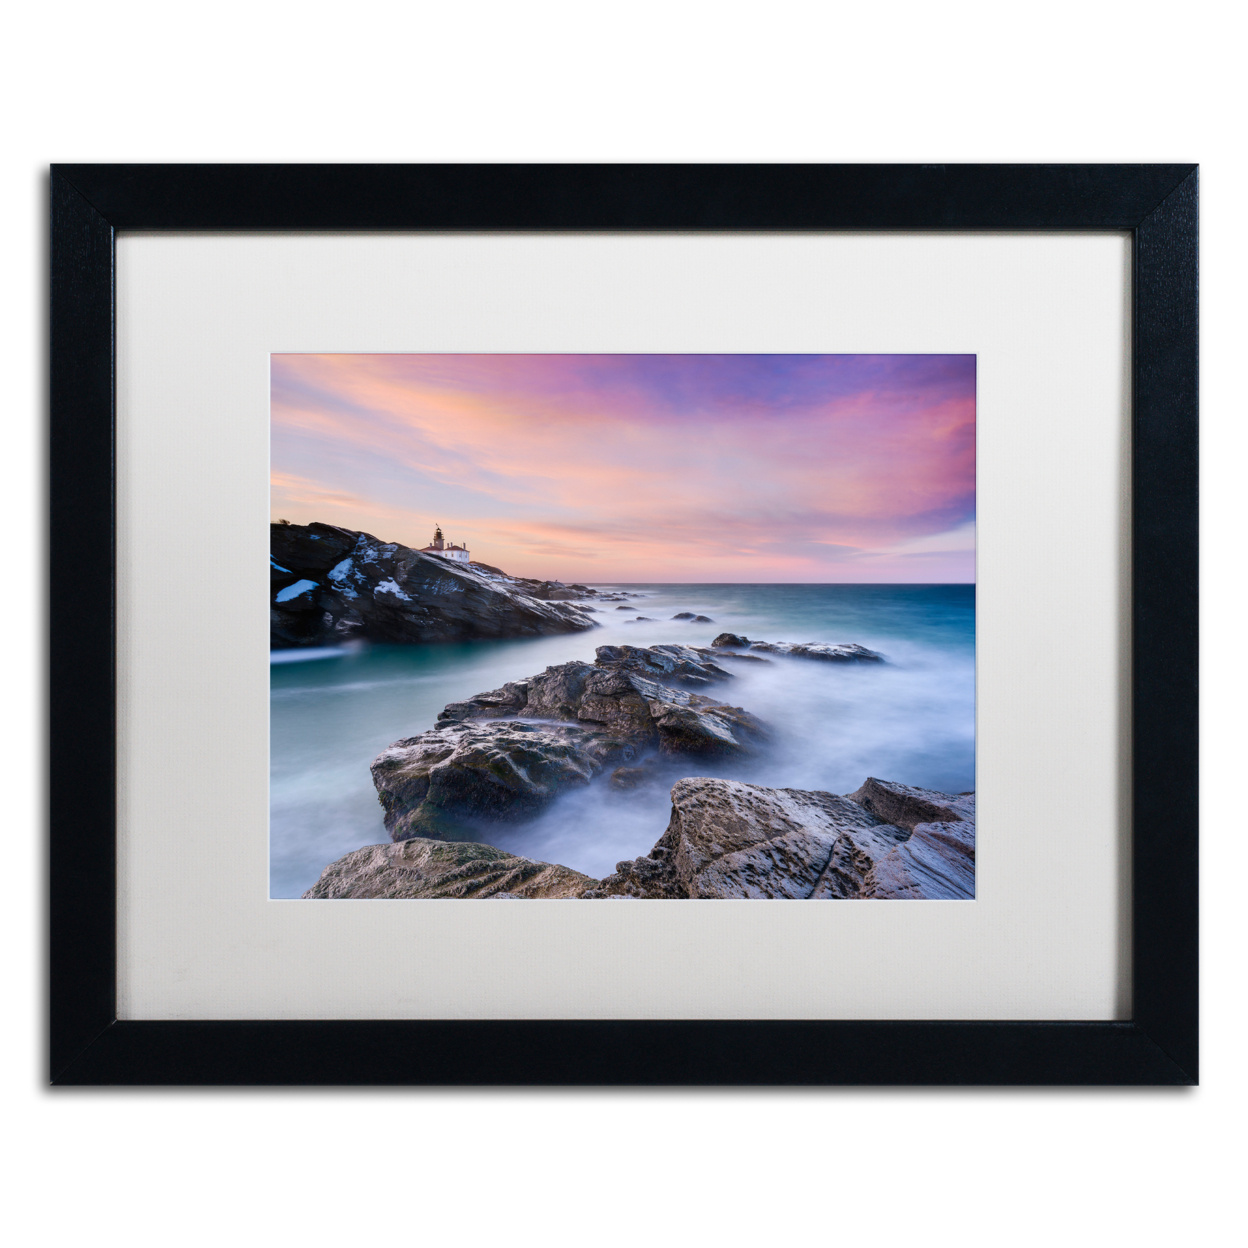 Michael Blanchette Photography 'Dawn Glory' Black Wooden Framed Art 18 X 22 Inches